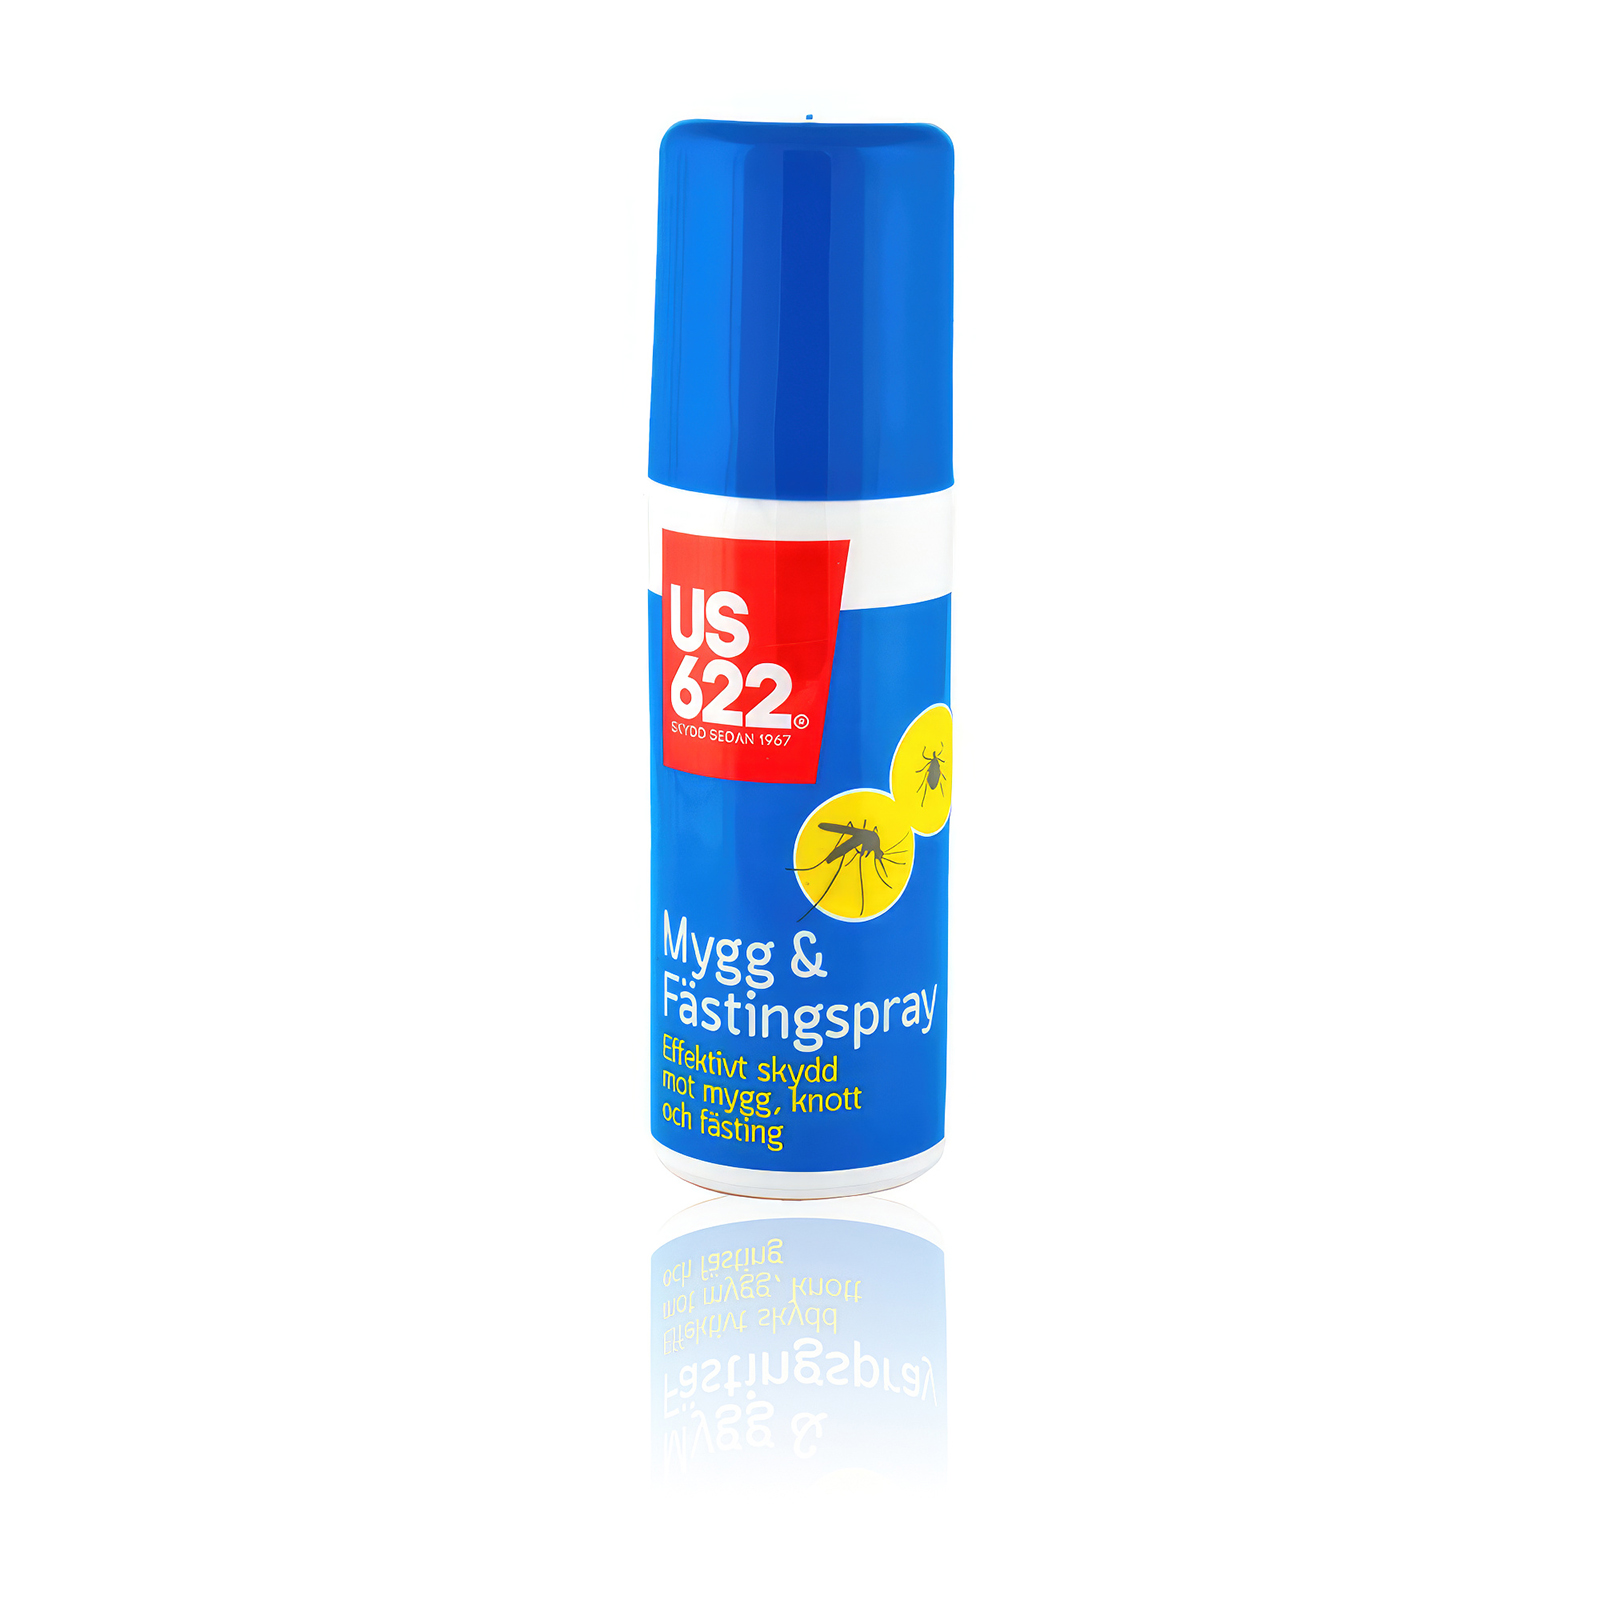 Insect spray 60ml - Protection against mosquitoes midges and ticks